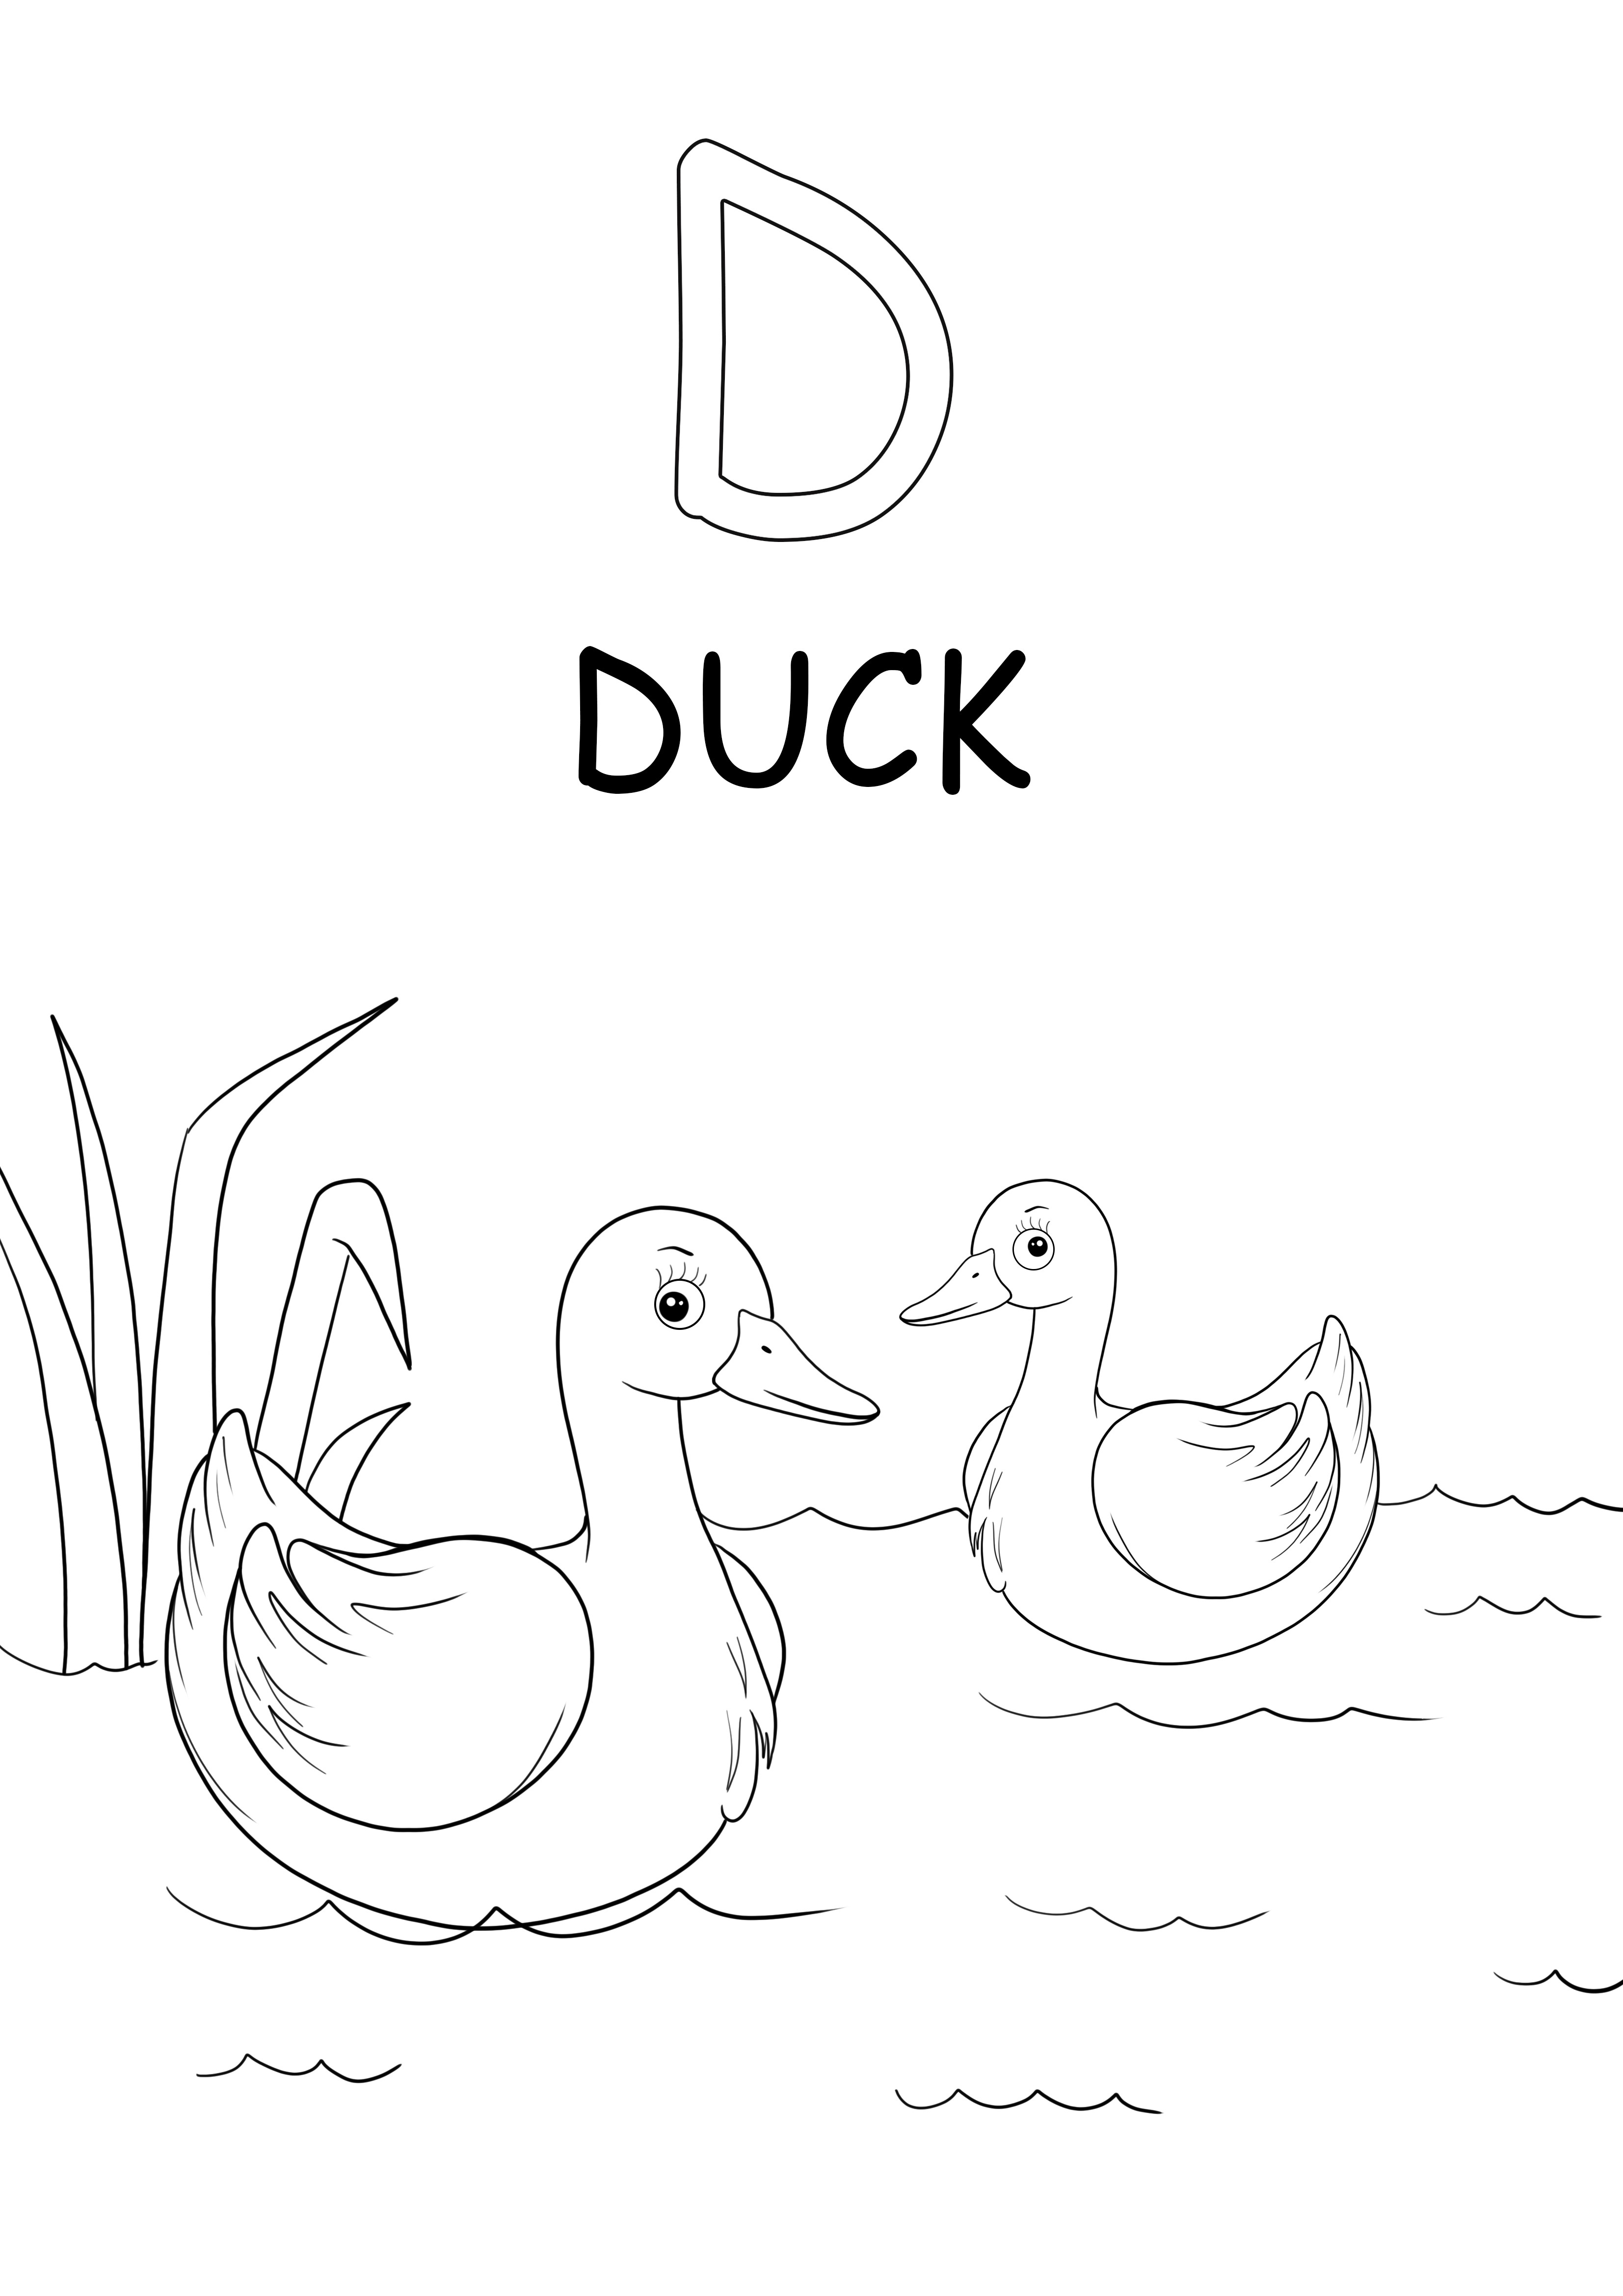 Uppercase D is for duck word free printable page